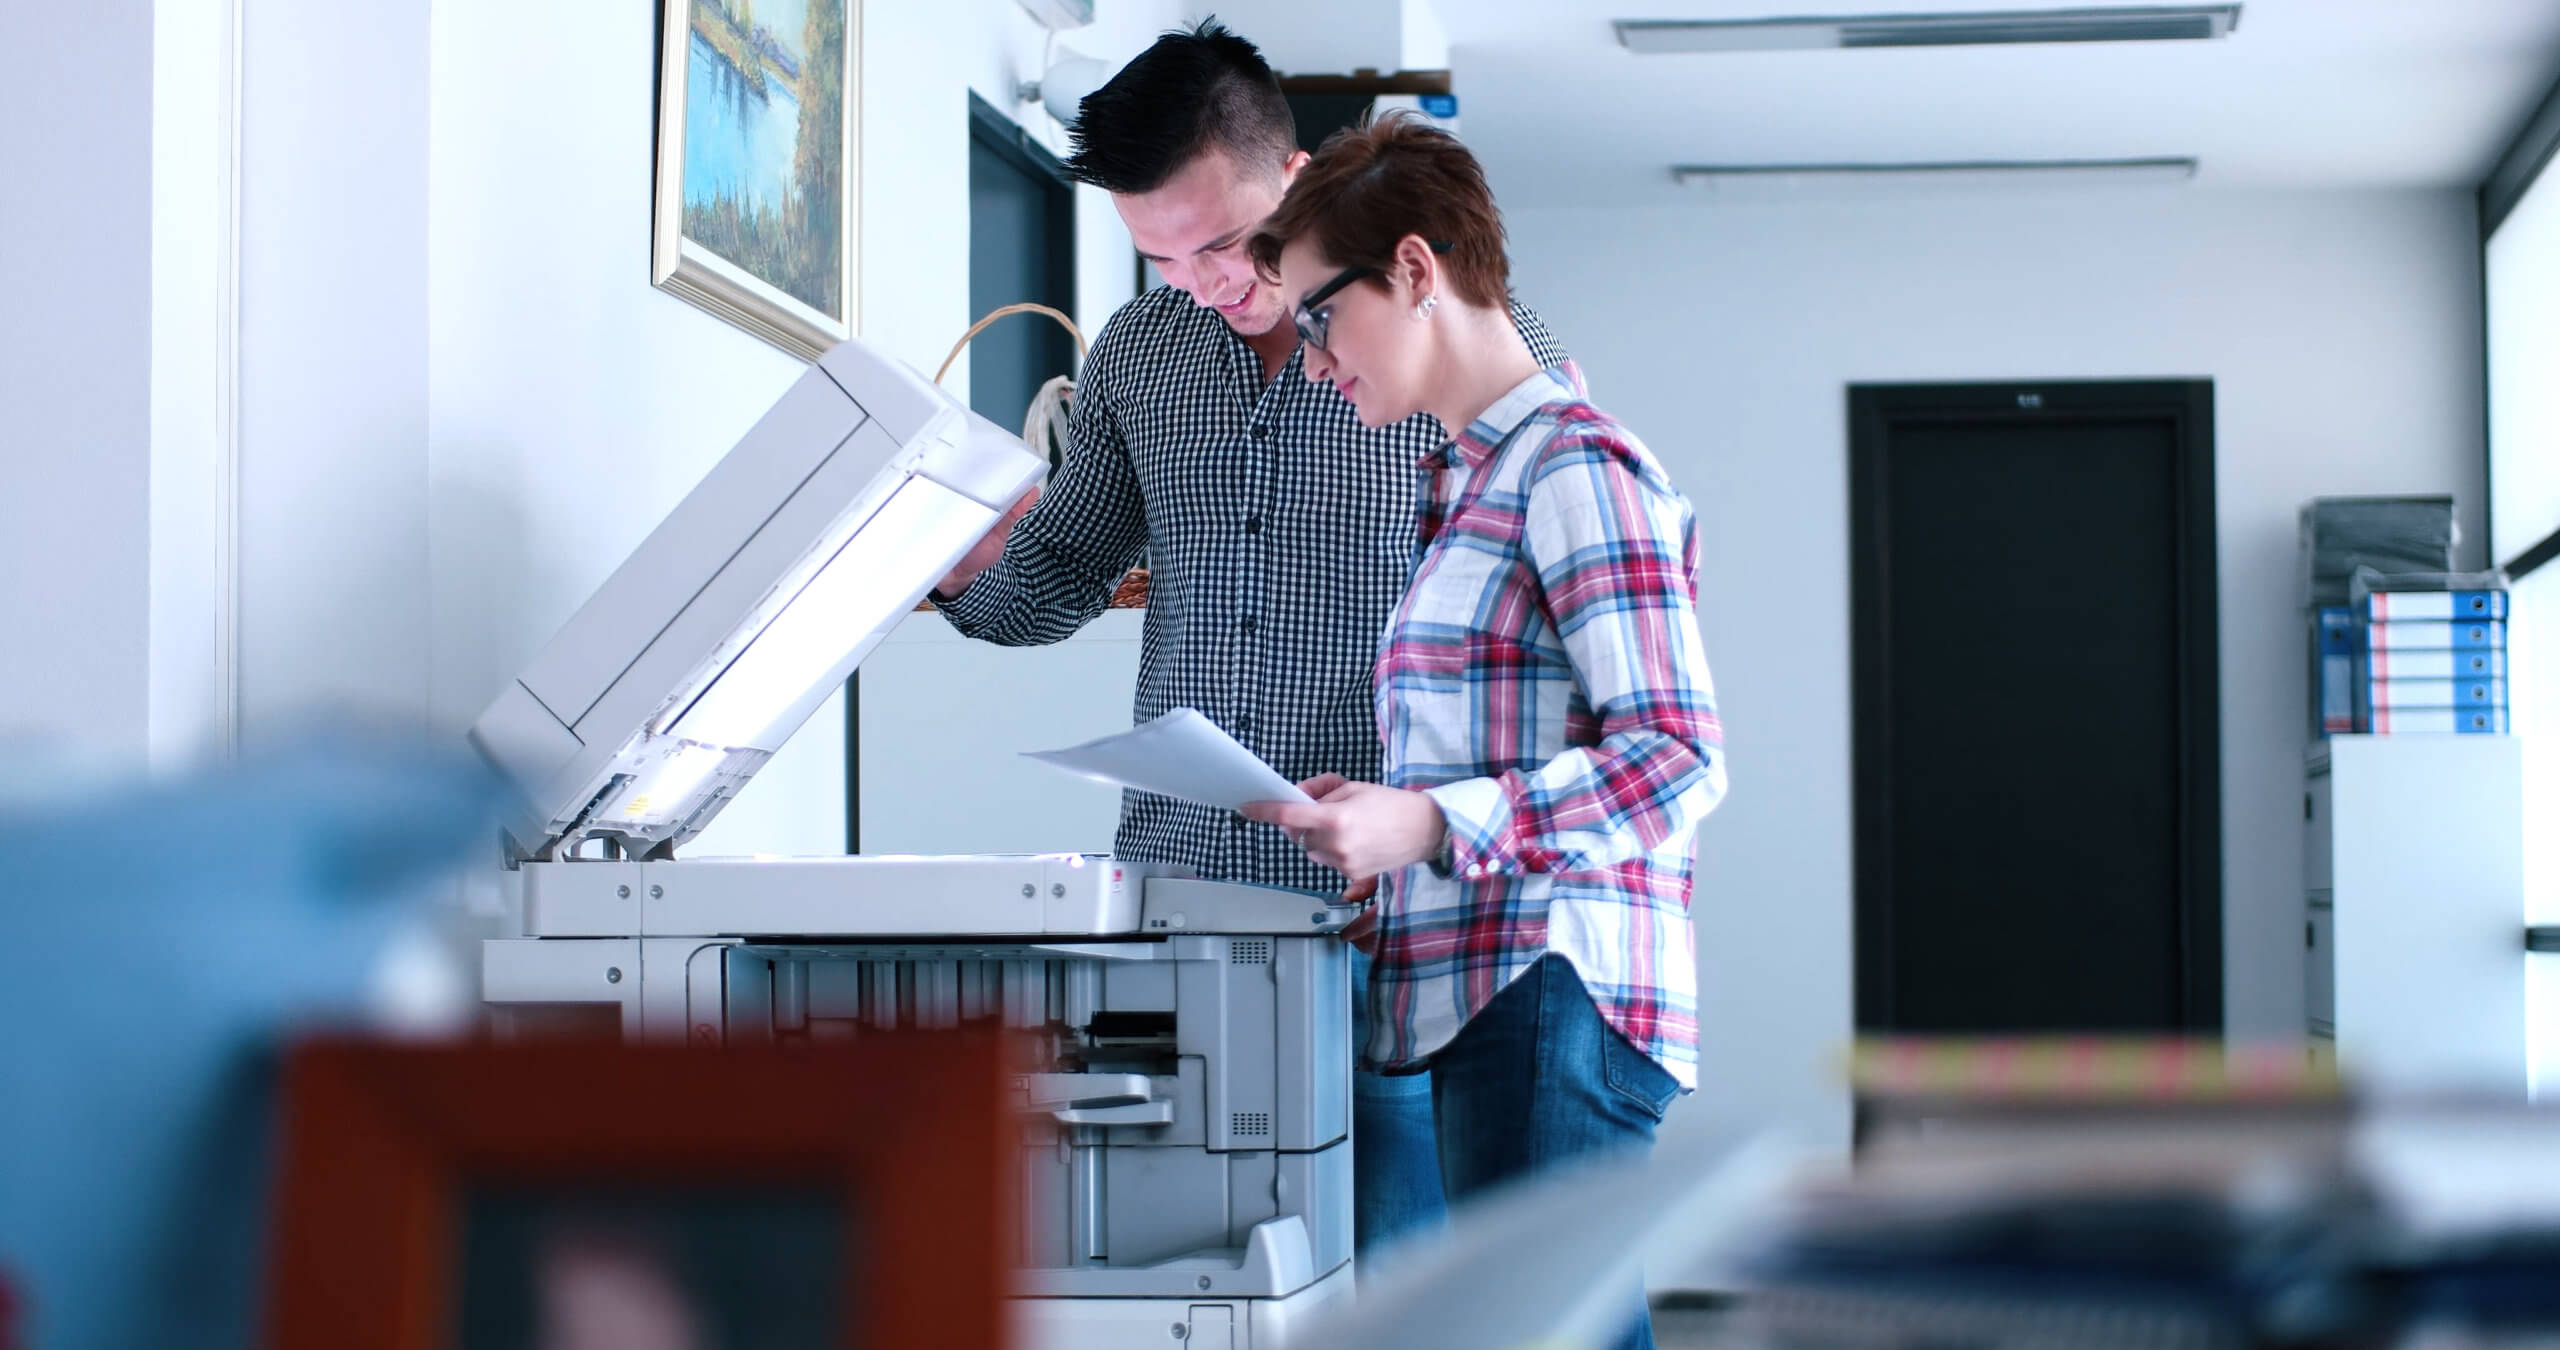 Printer Solutions Manufacturer RISO Moves from Siloed Data to Total IoT Transformation